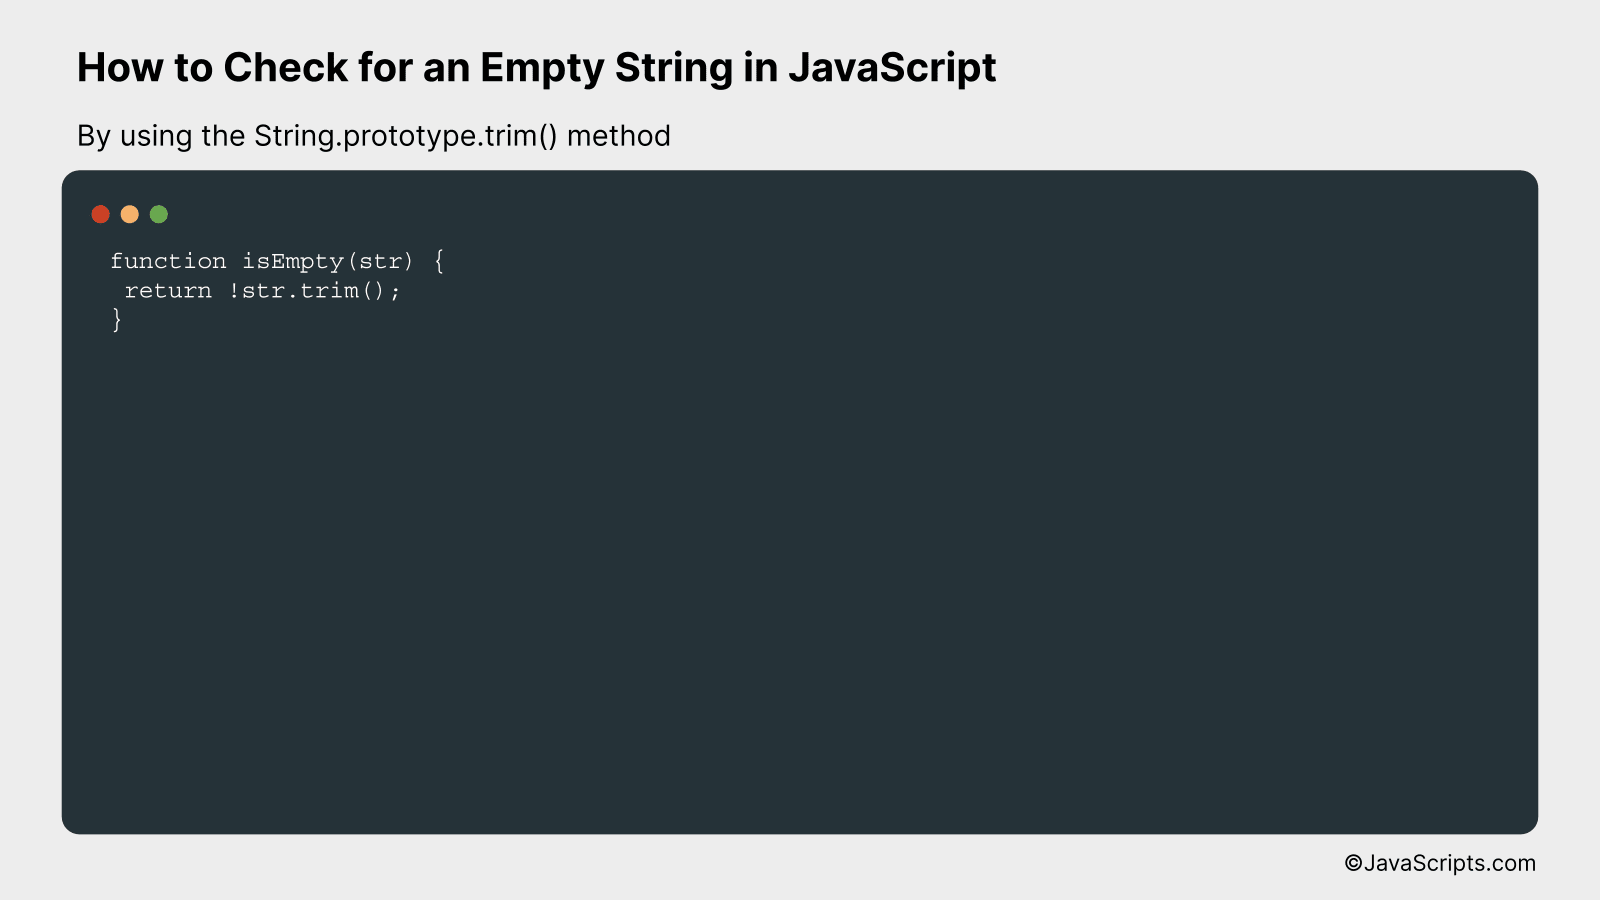 By using the String.prototype.trim() method